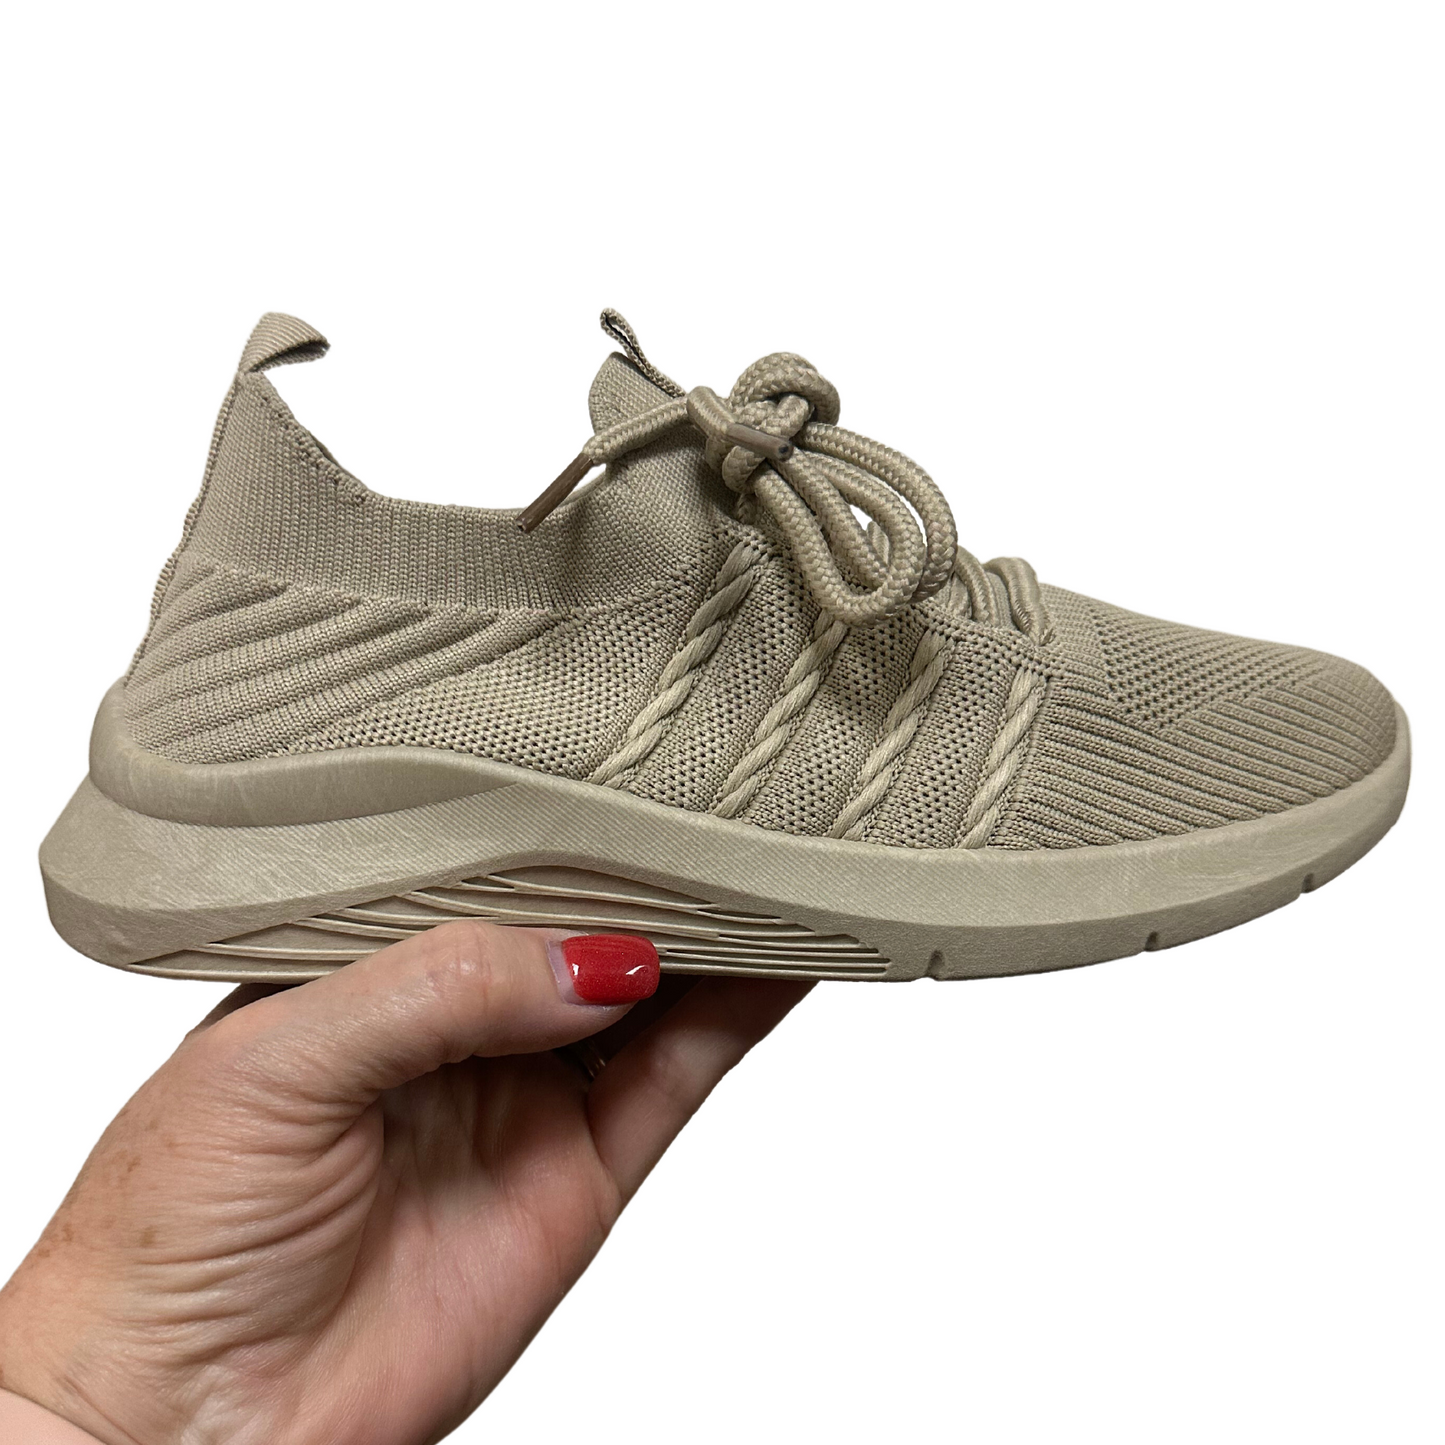 These stylish Tan Woven Sneakers are the perfect addition to any outfit. Lightweight and breathable, the woven design ensures premium comfort all day long. Get your pair today and enjoy the feel of quality.